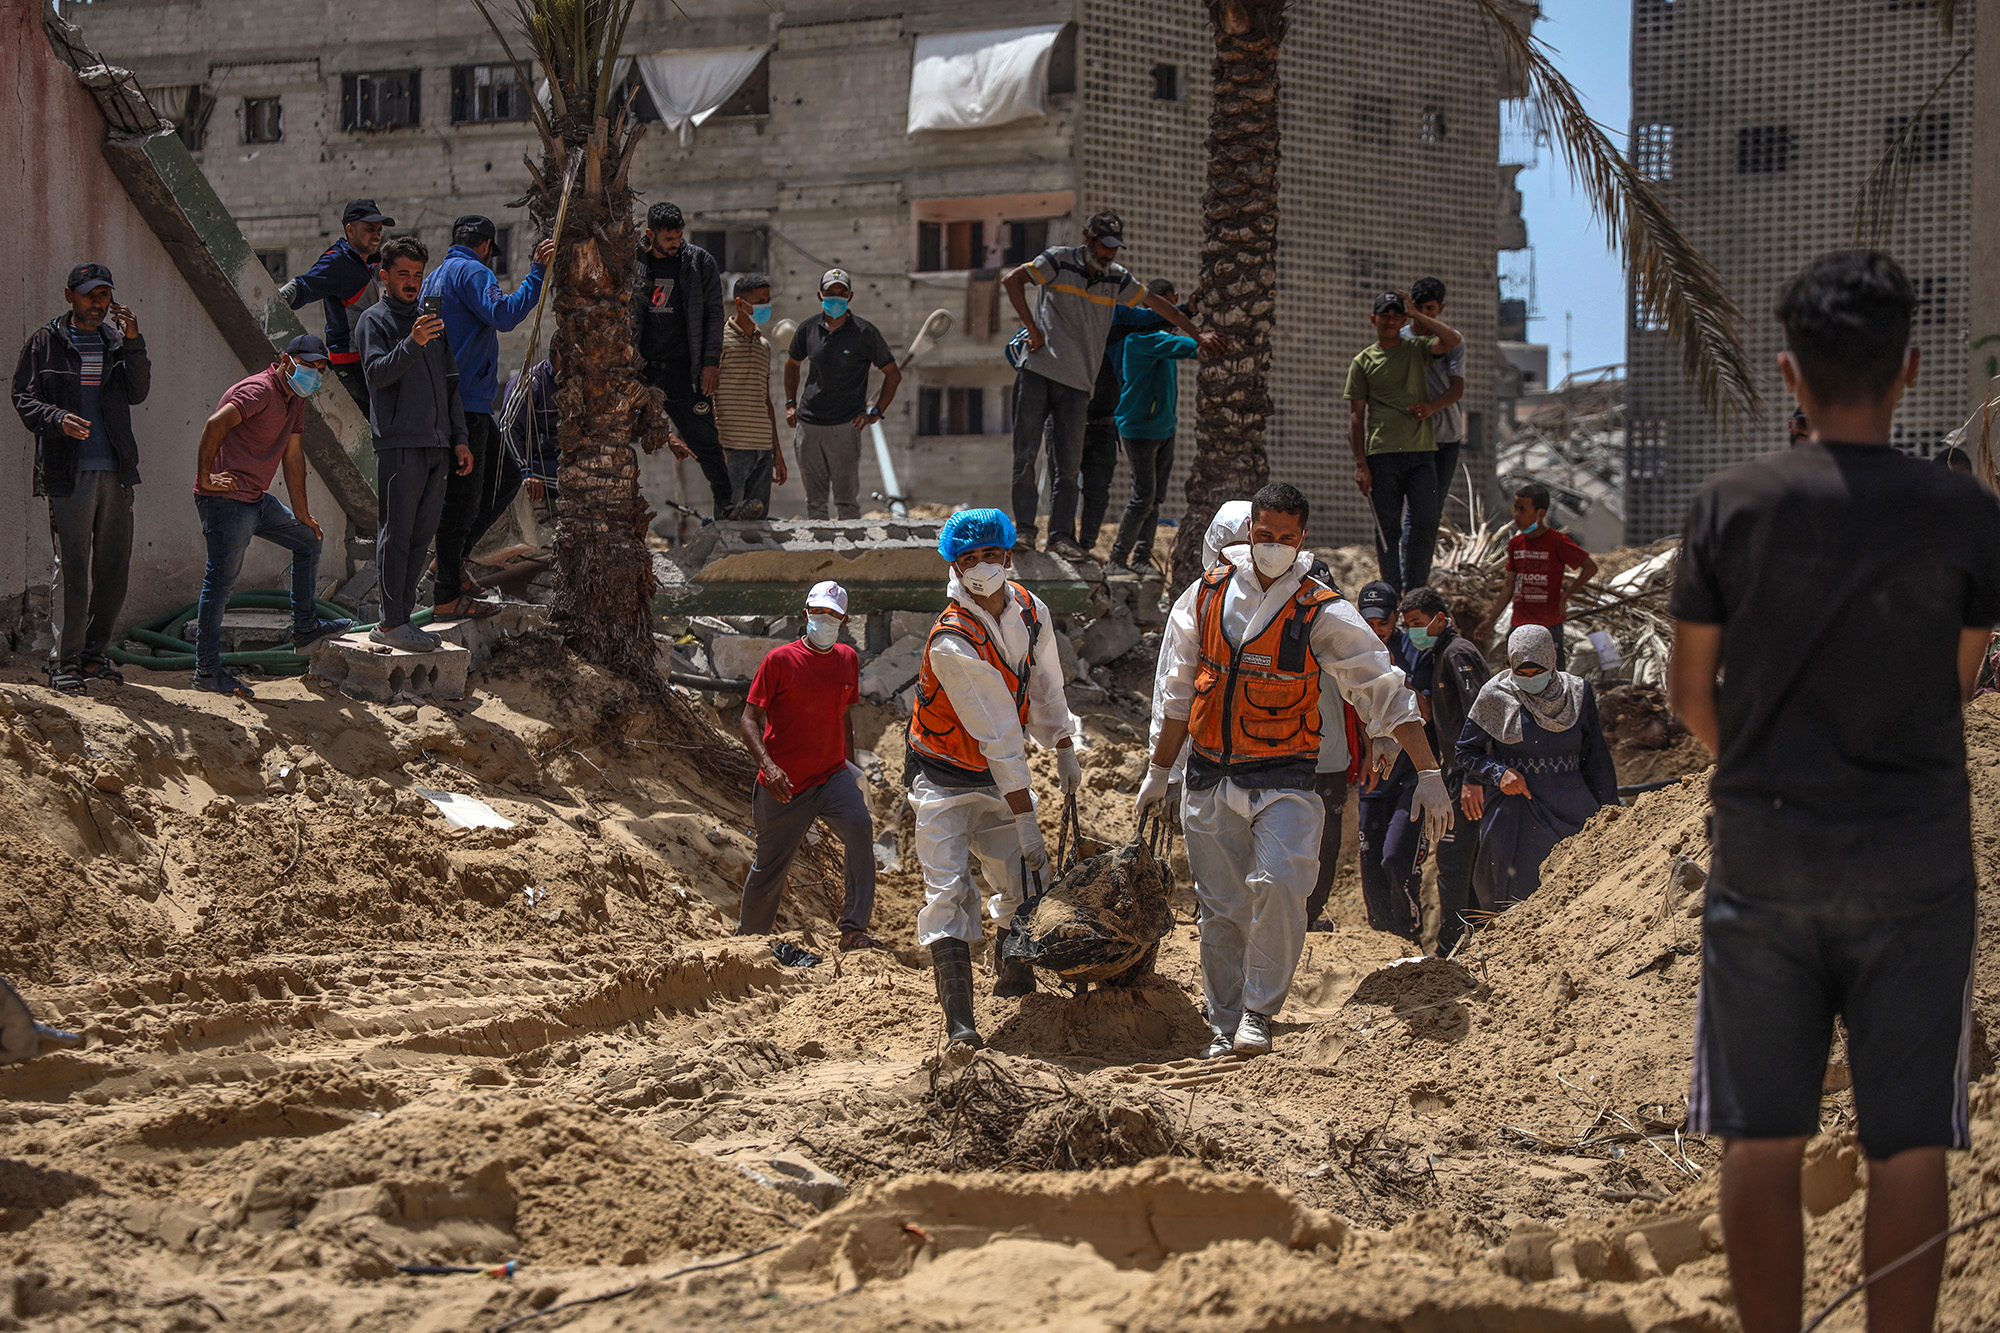 People and health workers unearth bodies found at Nasser Hospital in Khan Younis, Gaza, on April 23.